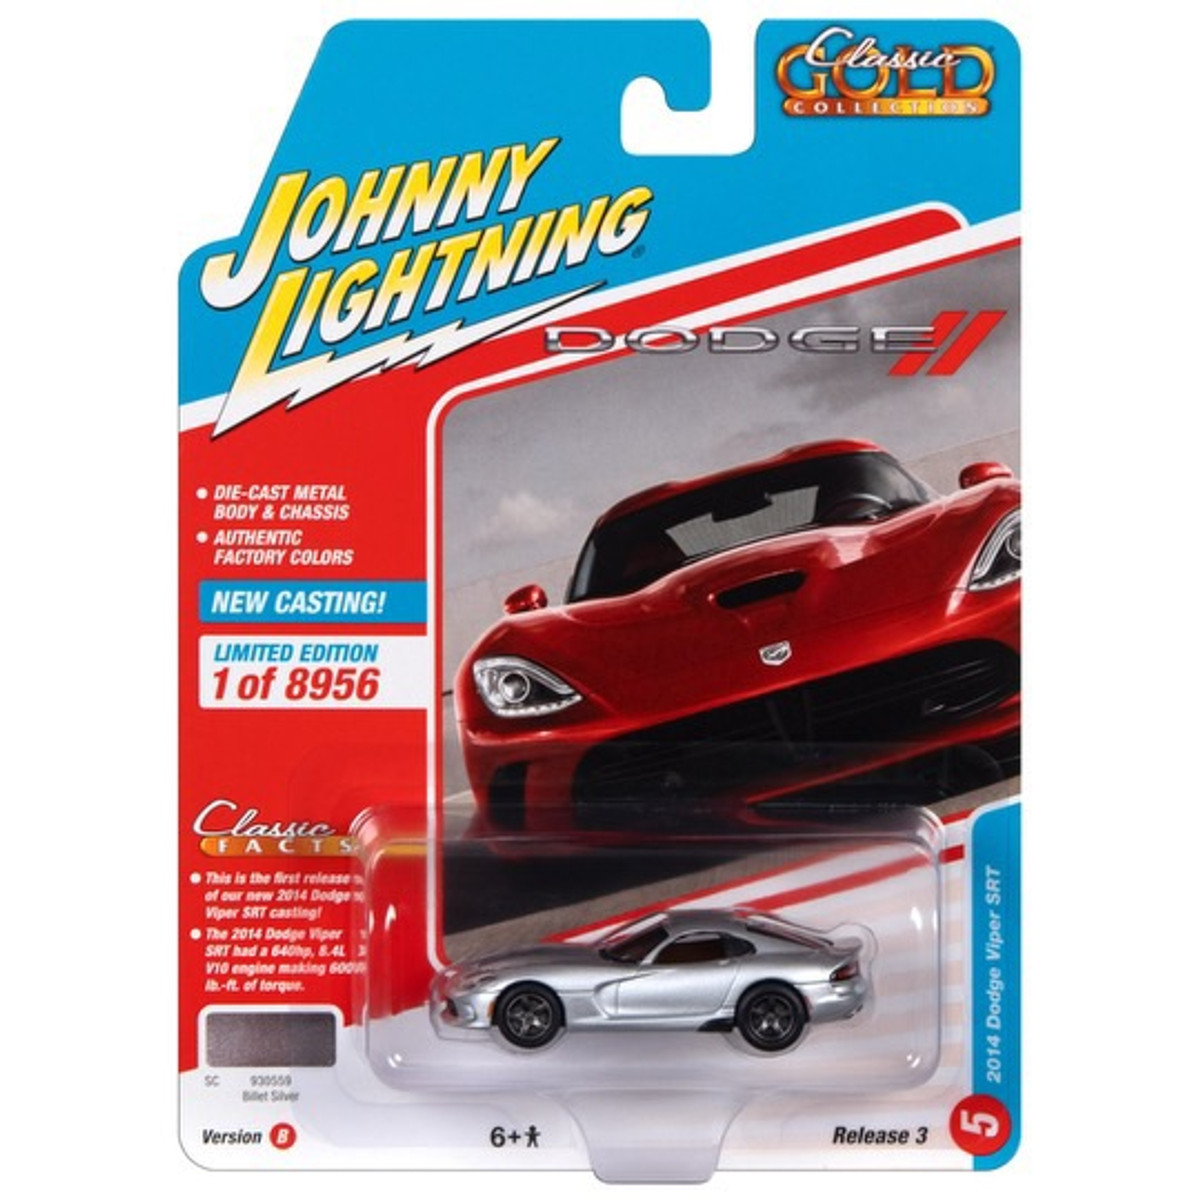 2022 Johnny Lightning Classic Gold Collection 2014 Dodge Viper SRT Release 3B 